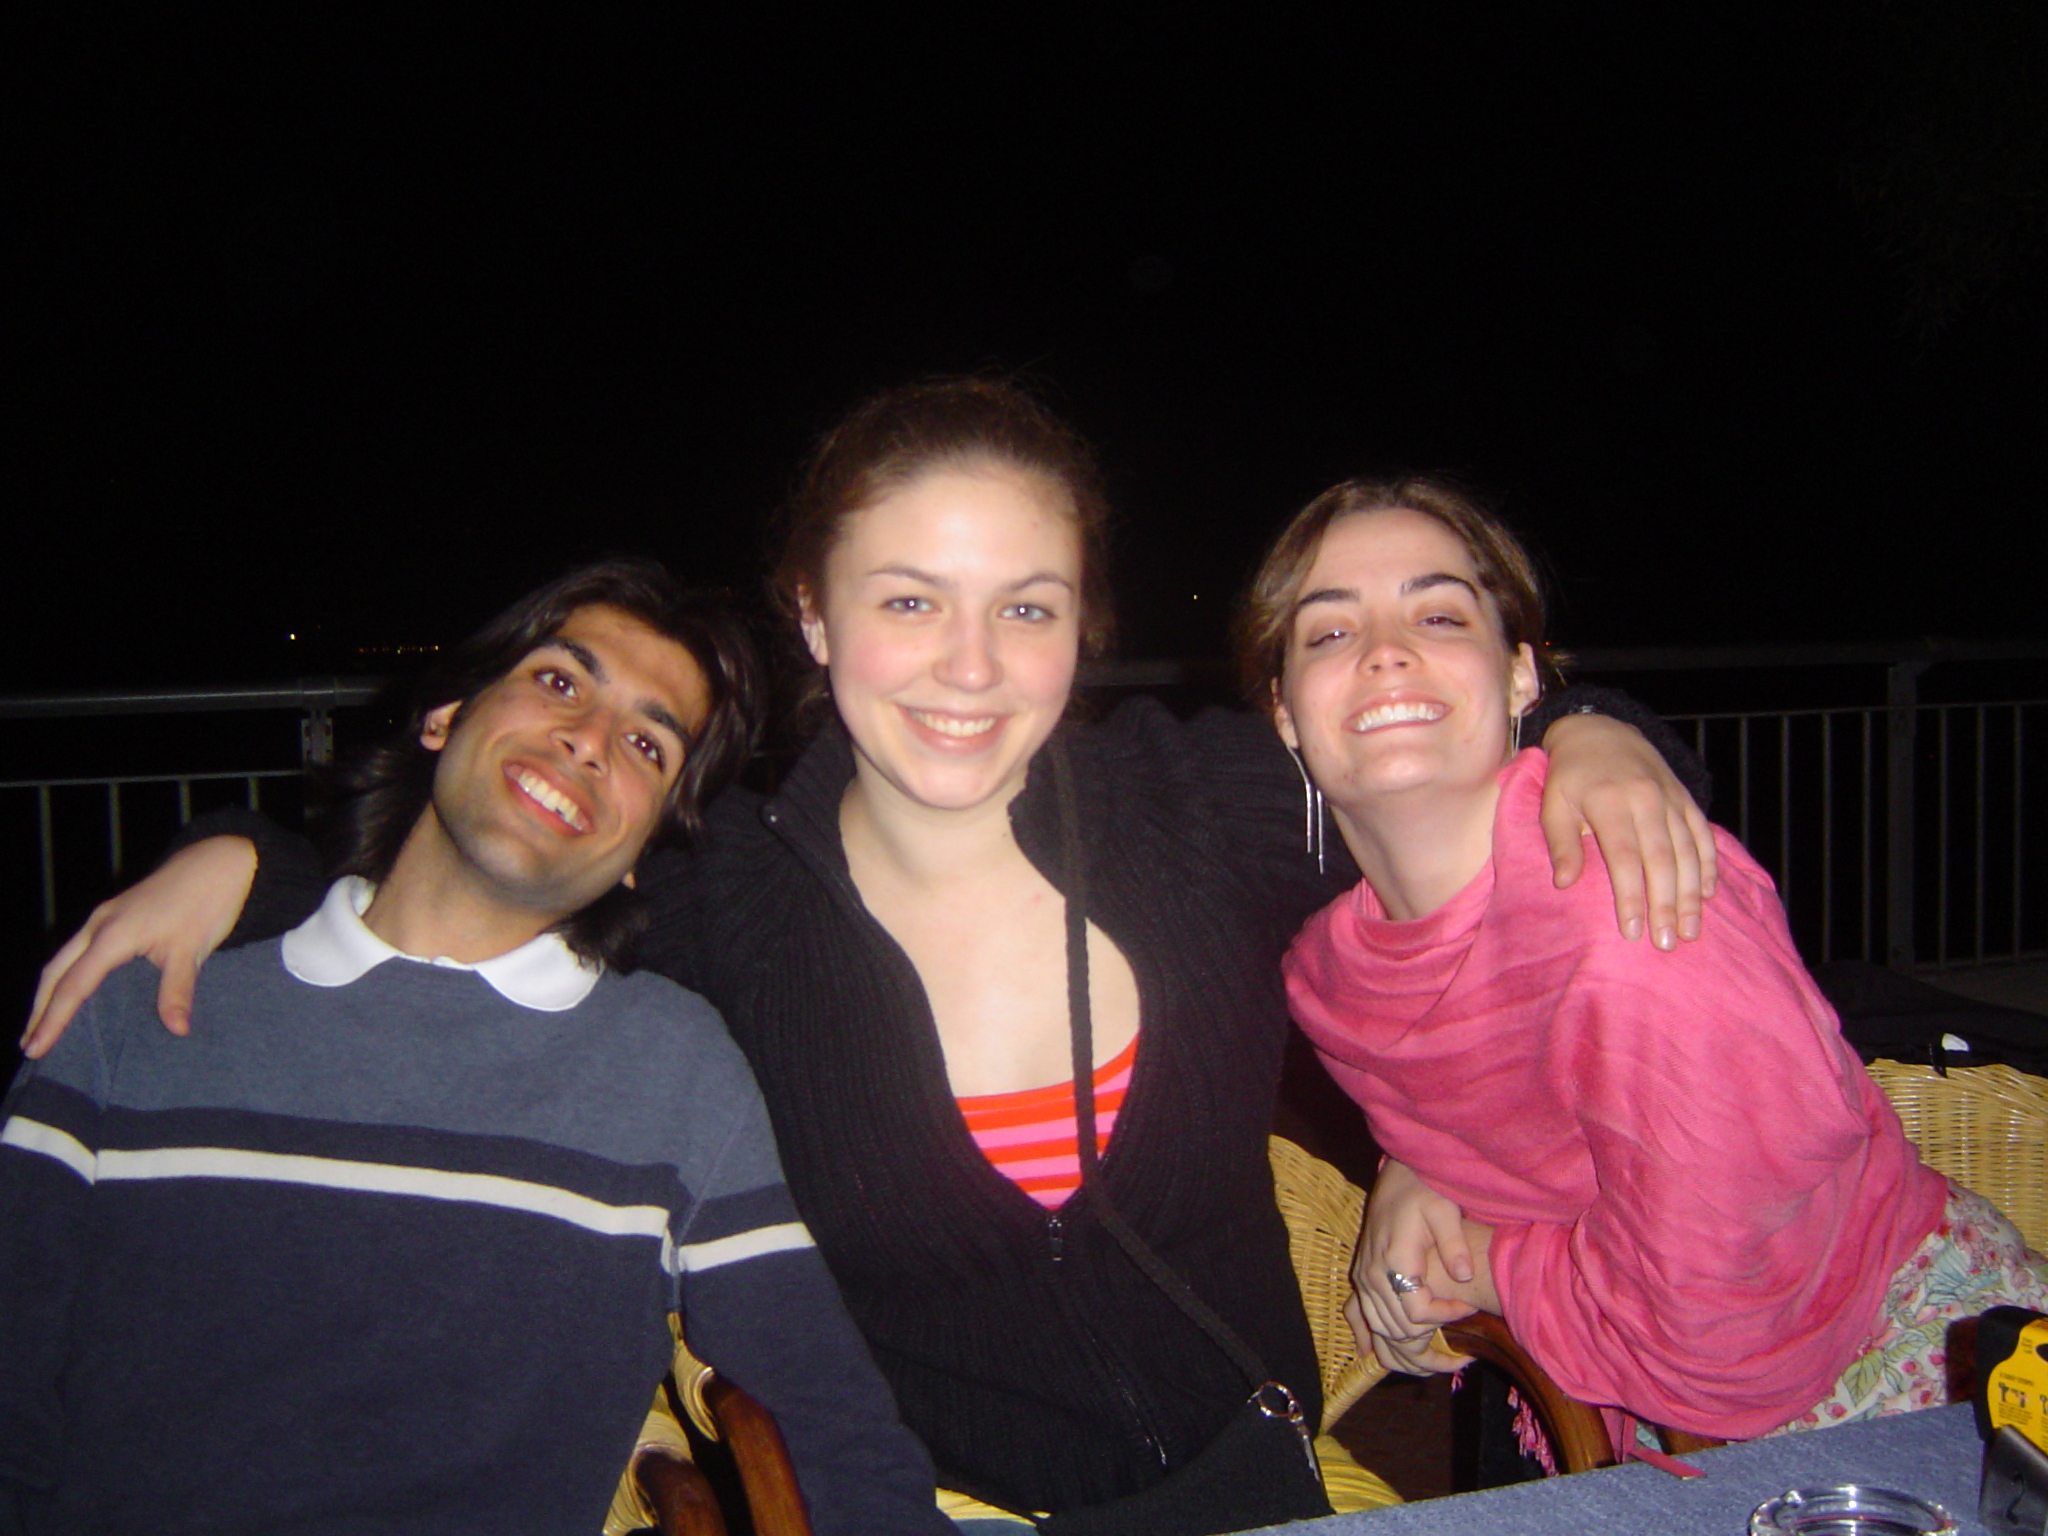 three people posing for the camera at night